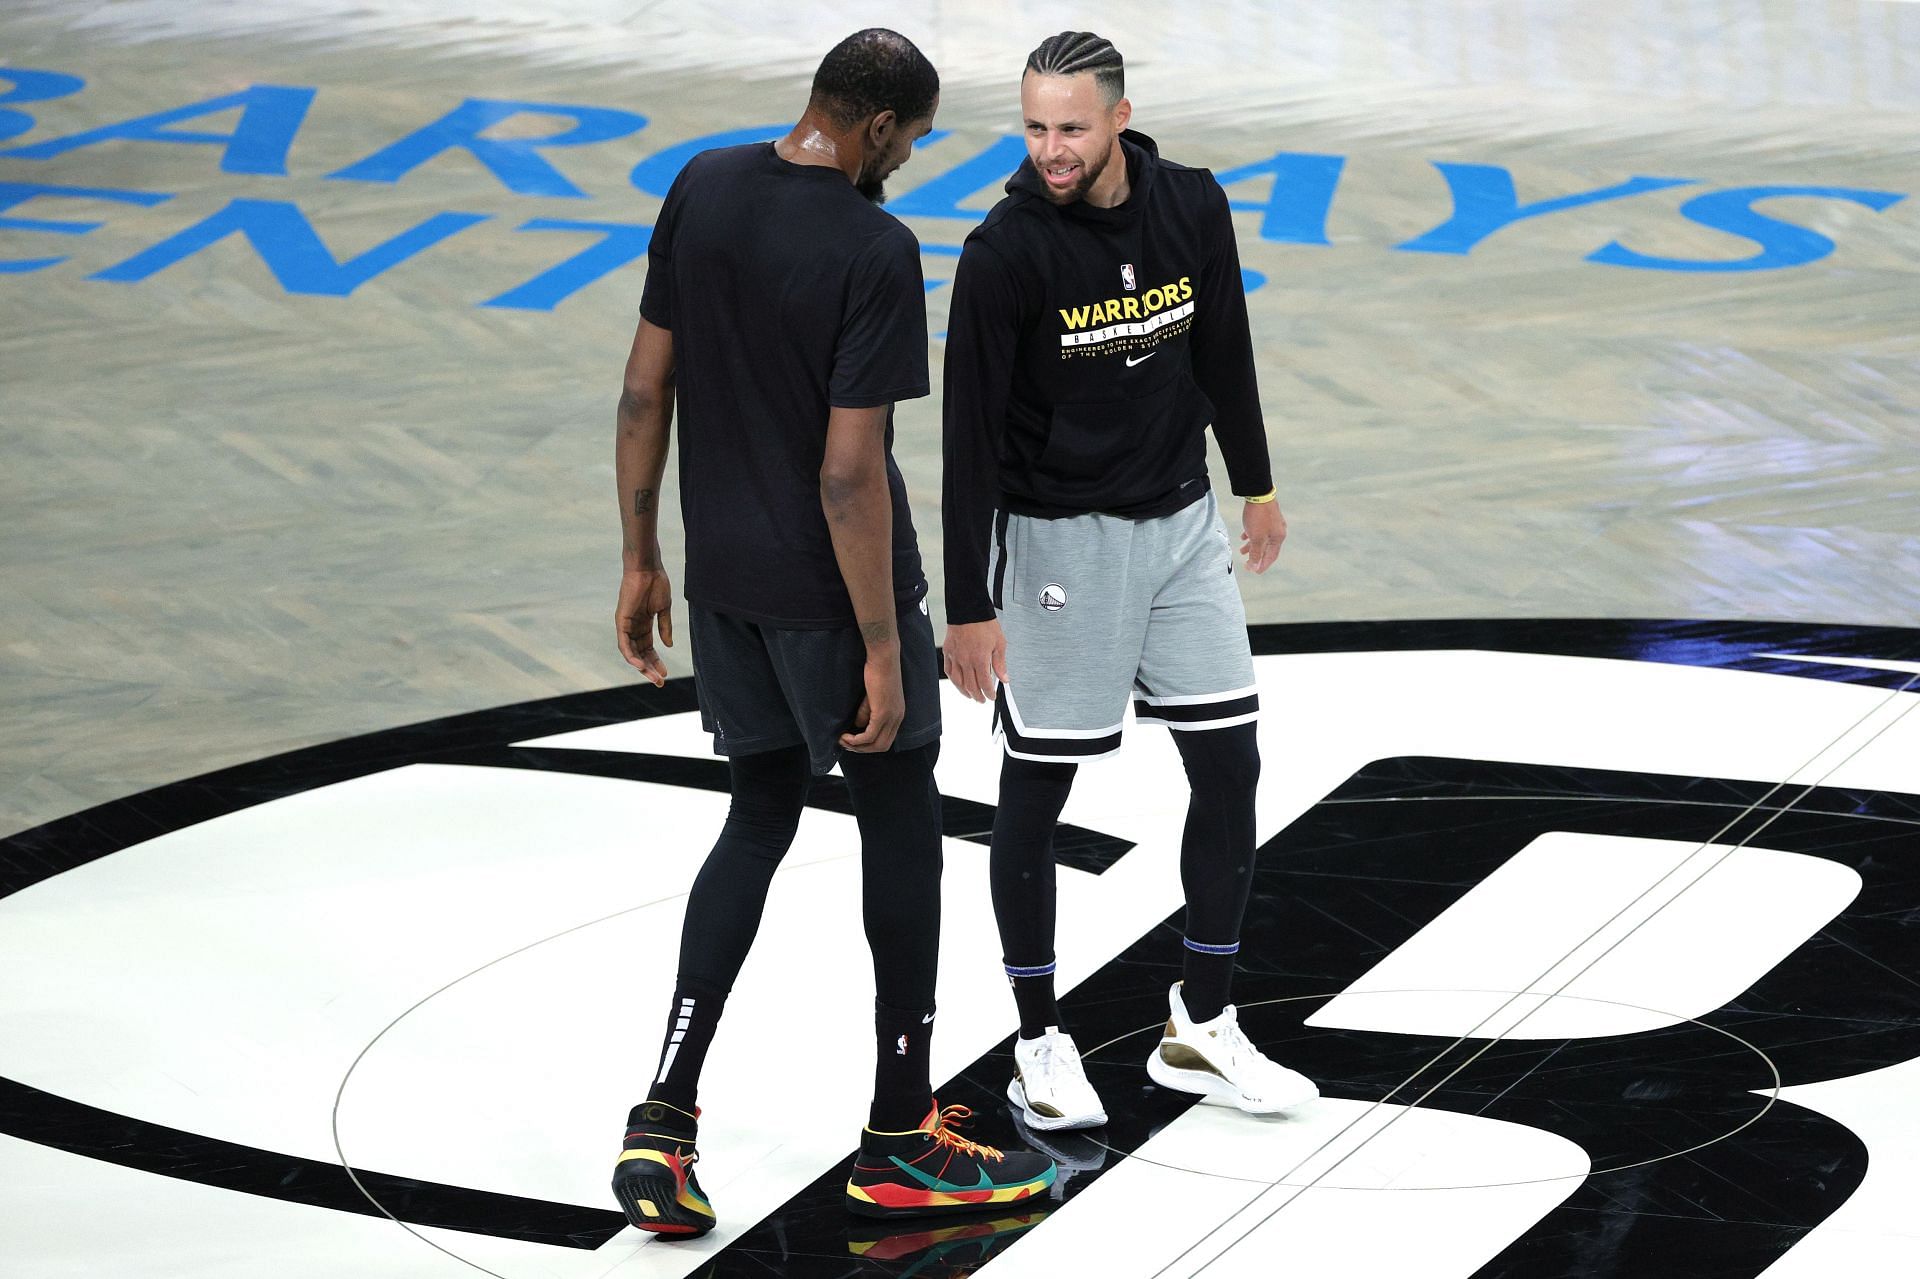 Steph Curry talking to Kevin Durant before their match against each other.